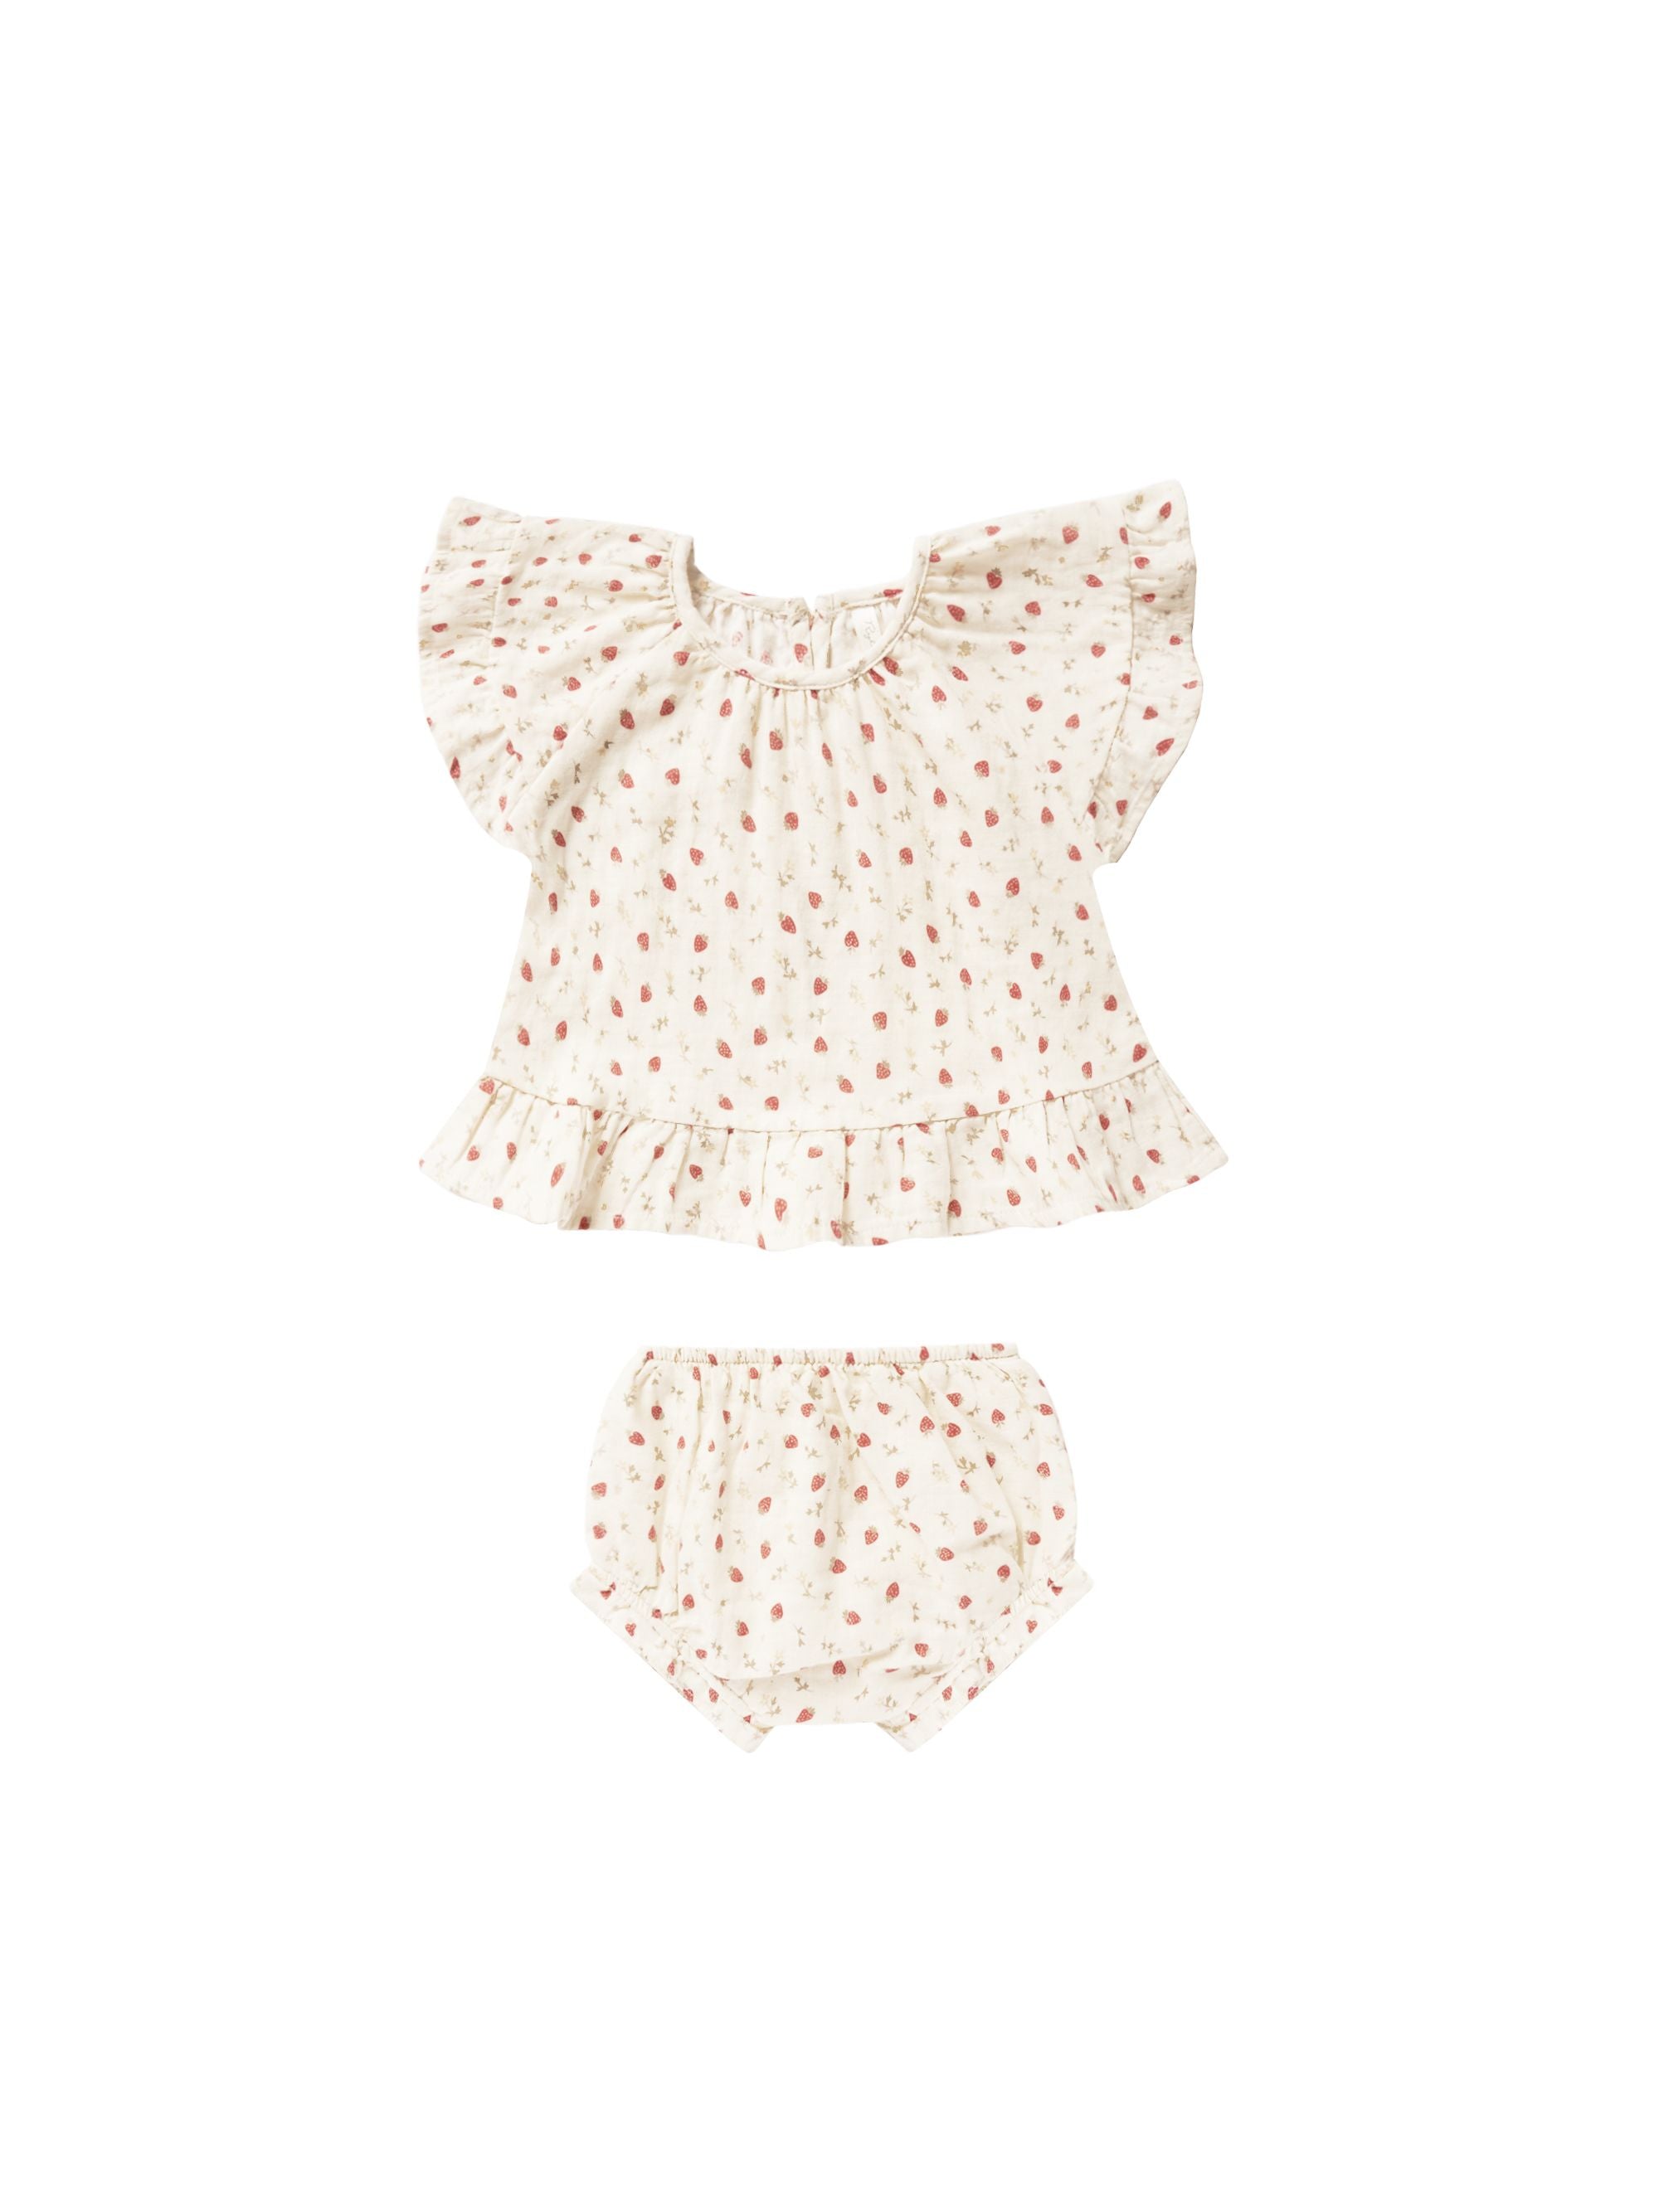 Rylee + Cru - Butterfly top and Bloomer